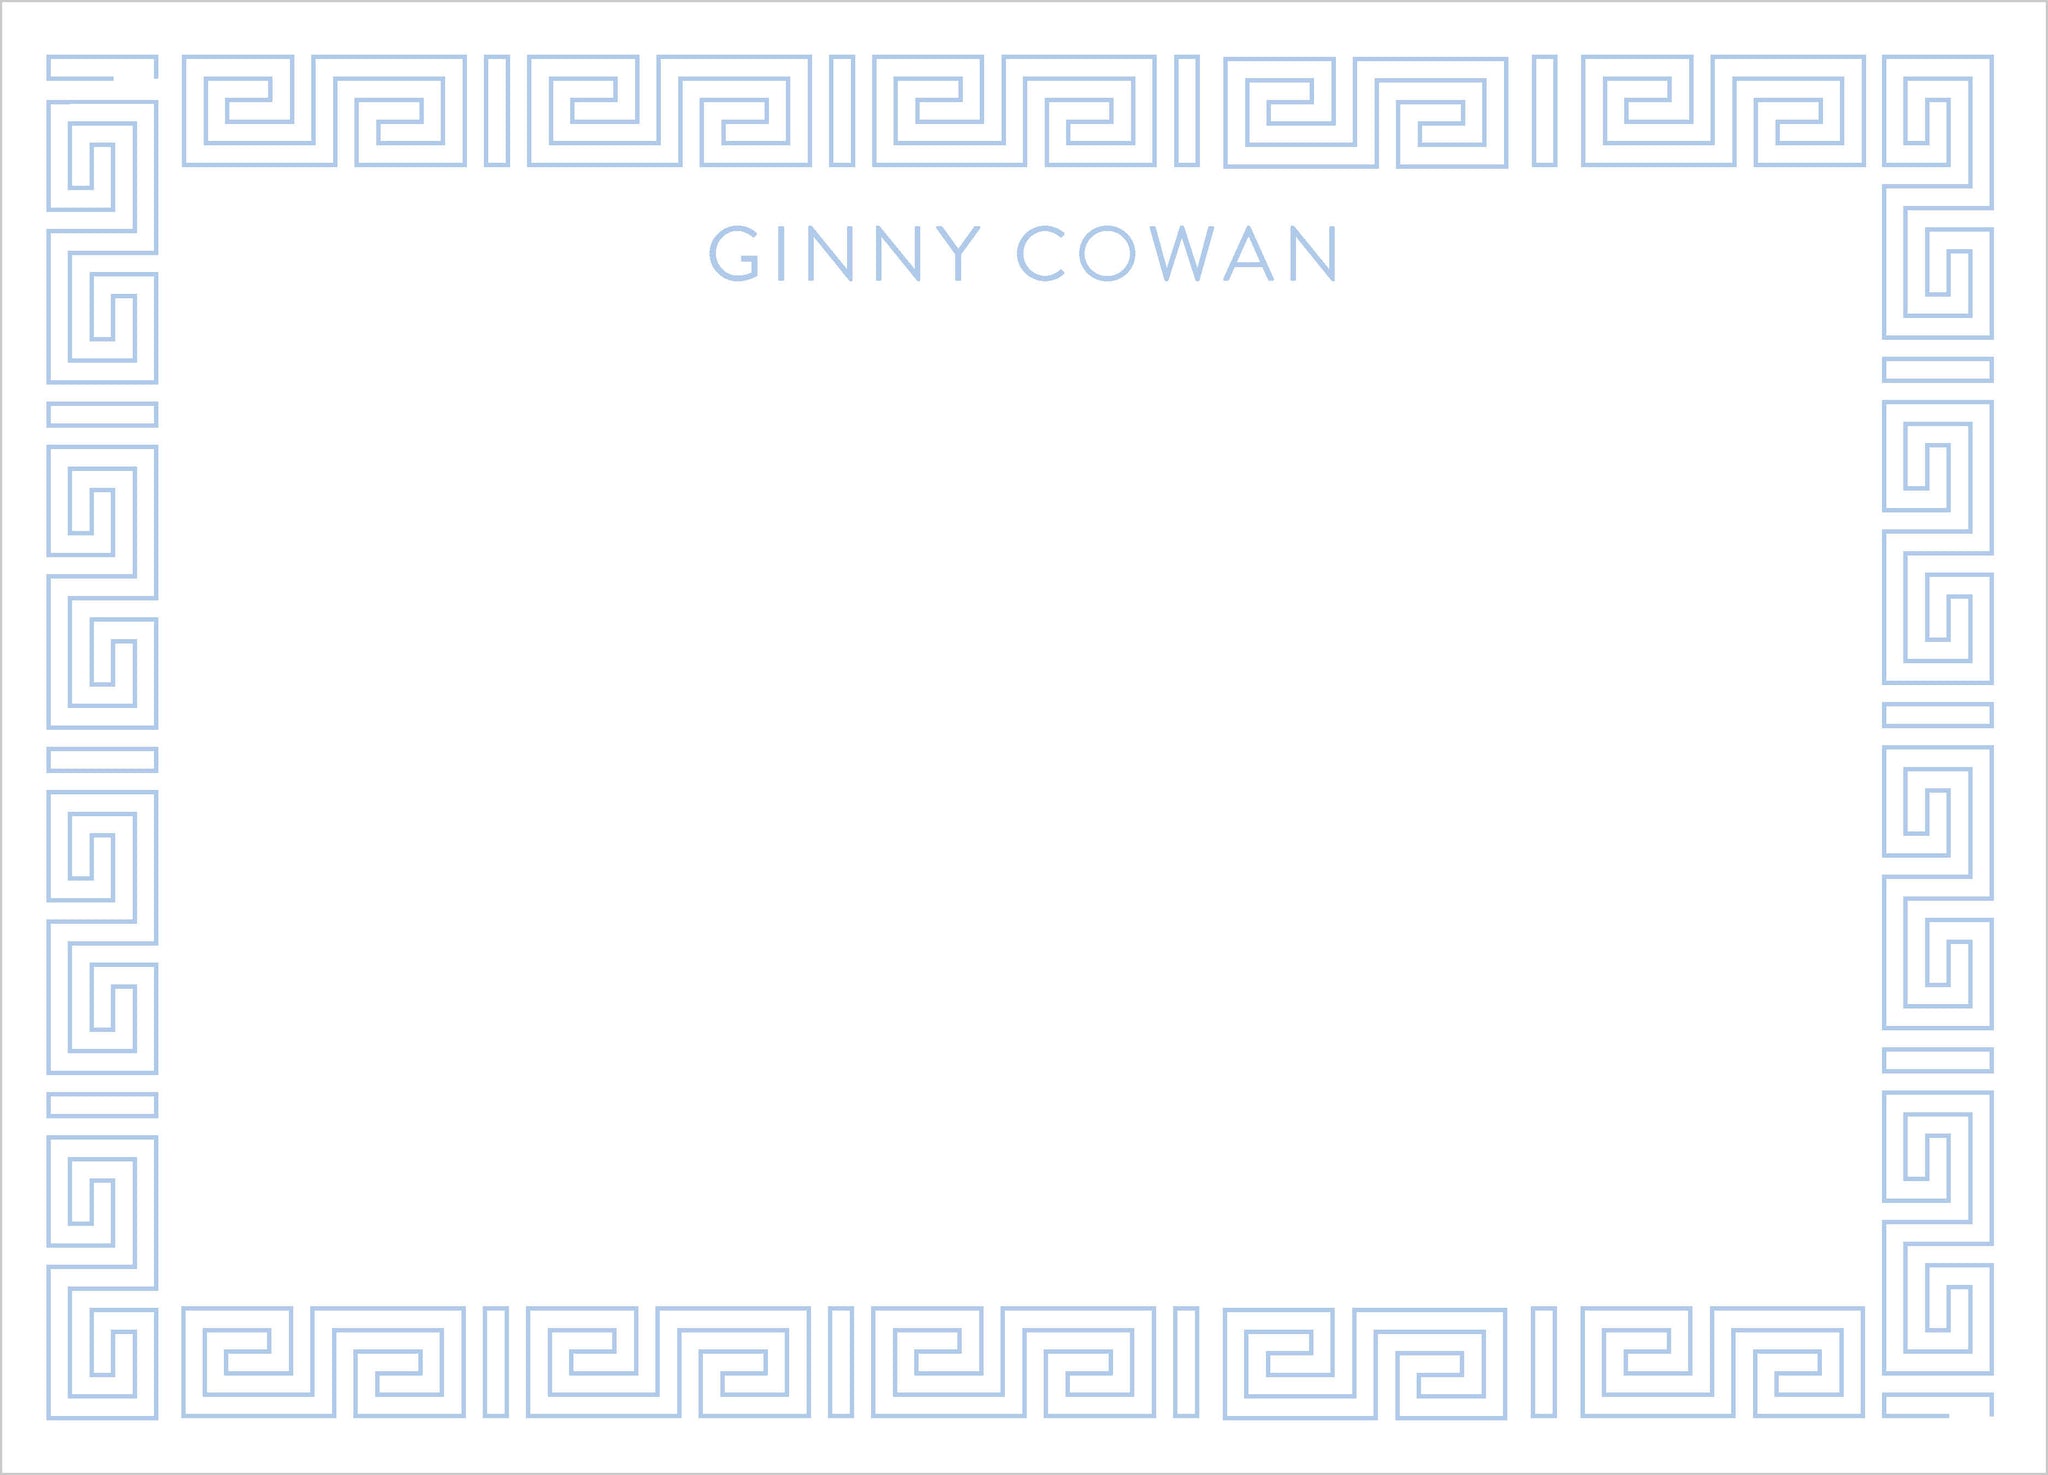 Ginny Personalized Note Cards